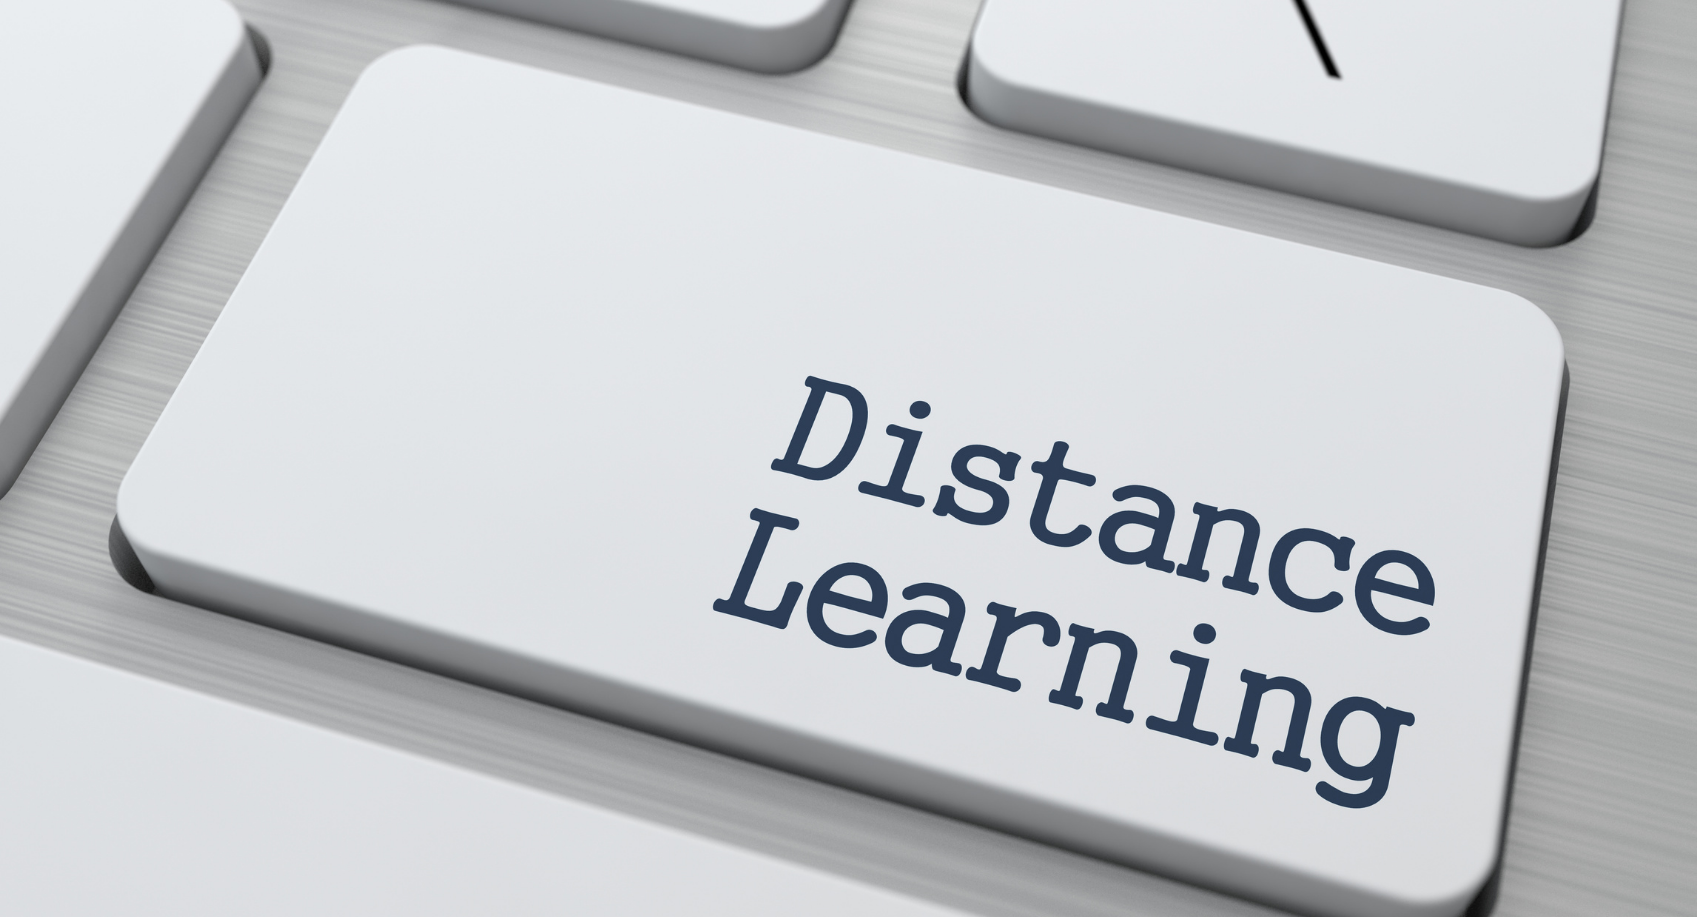 Top 10 UK Universities ideal for Distance Learning